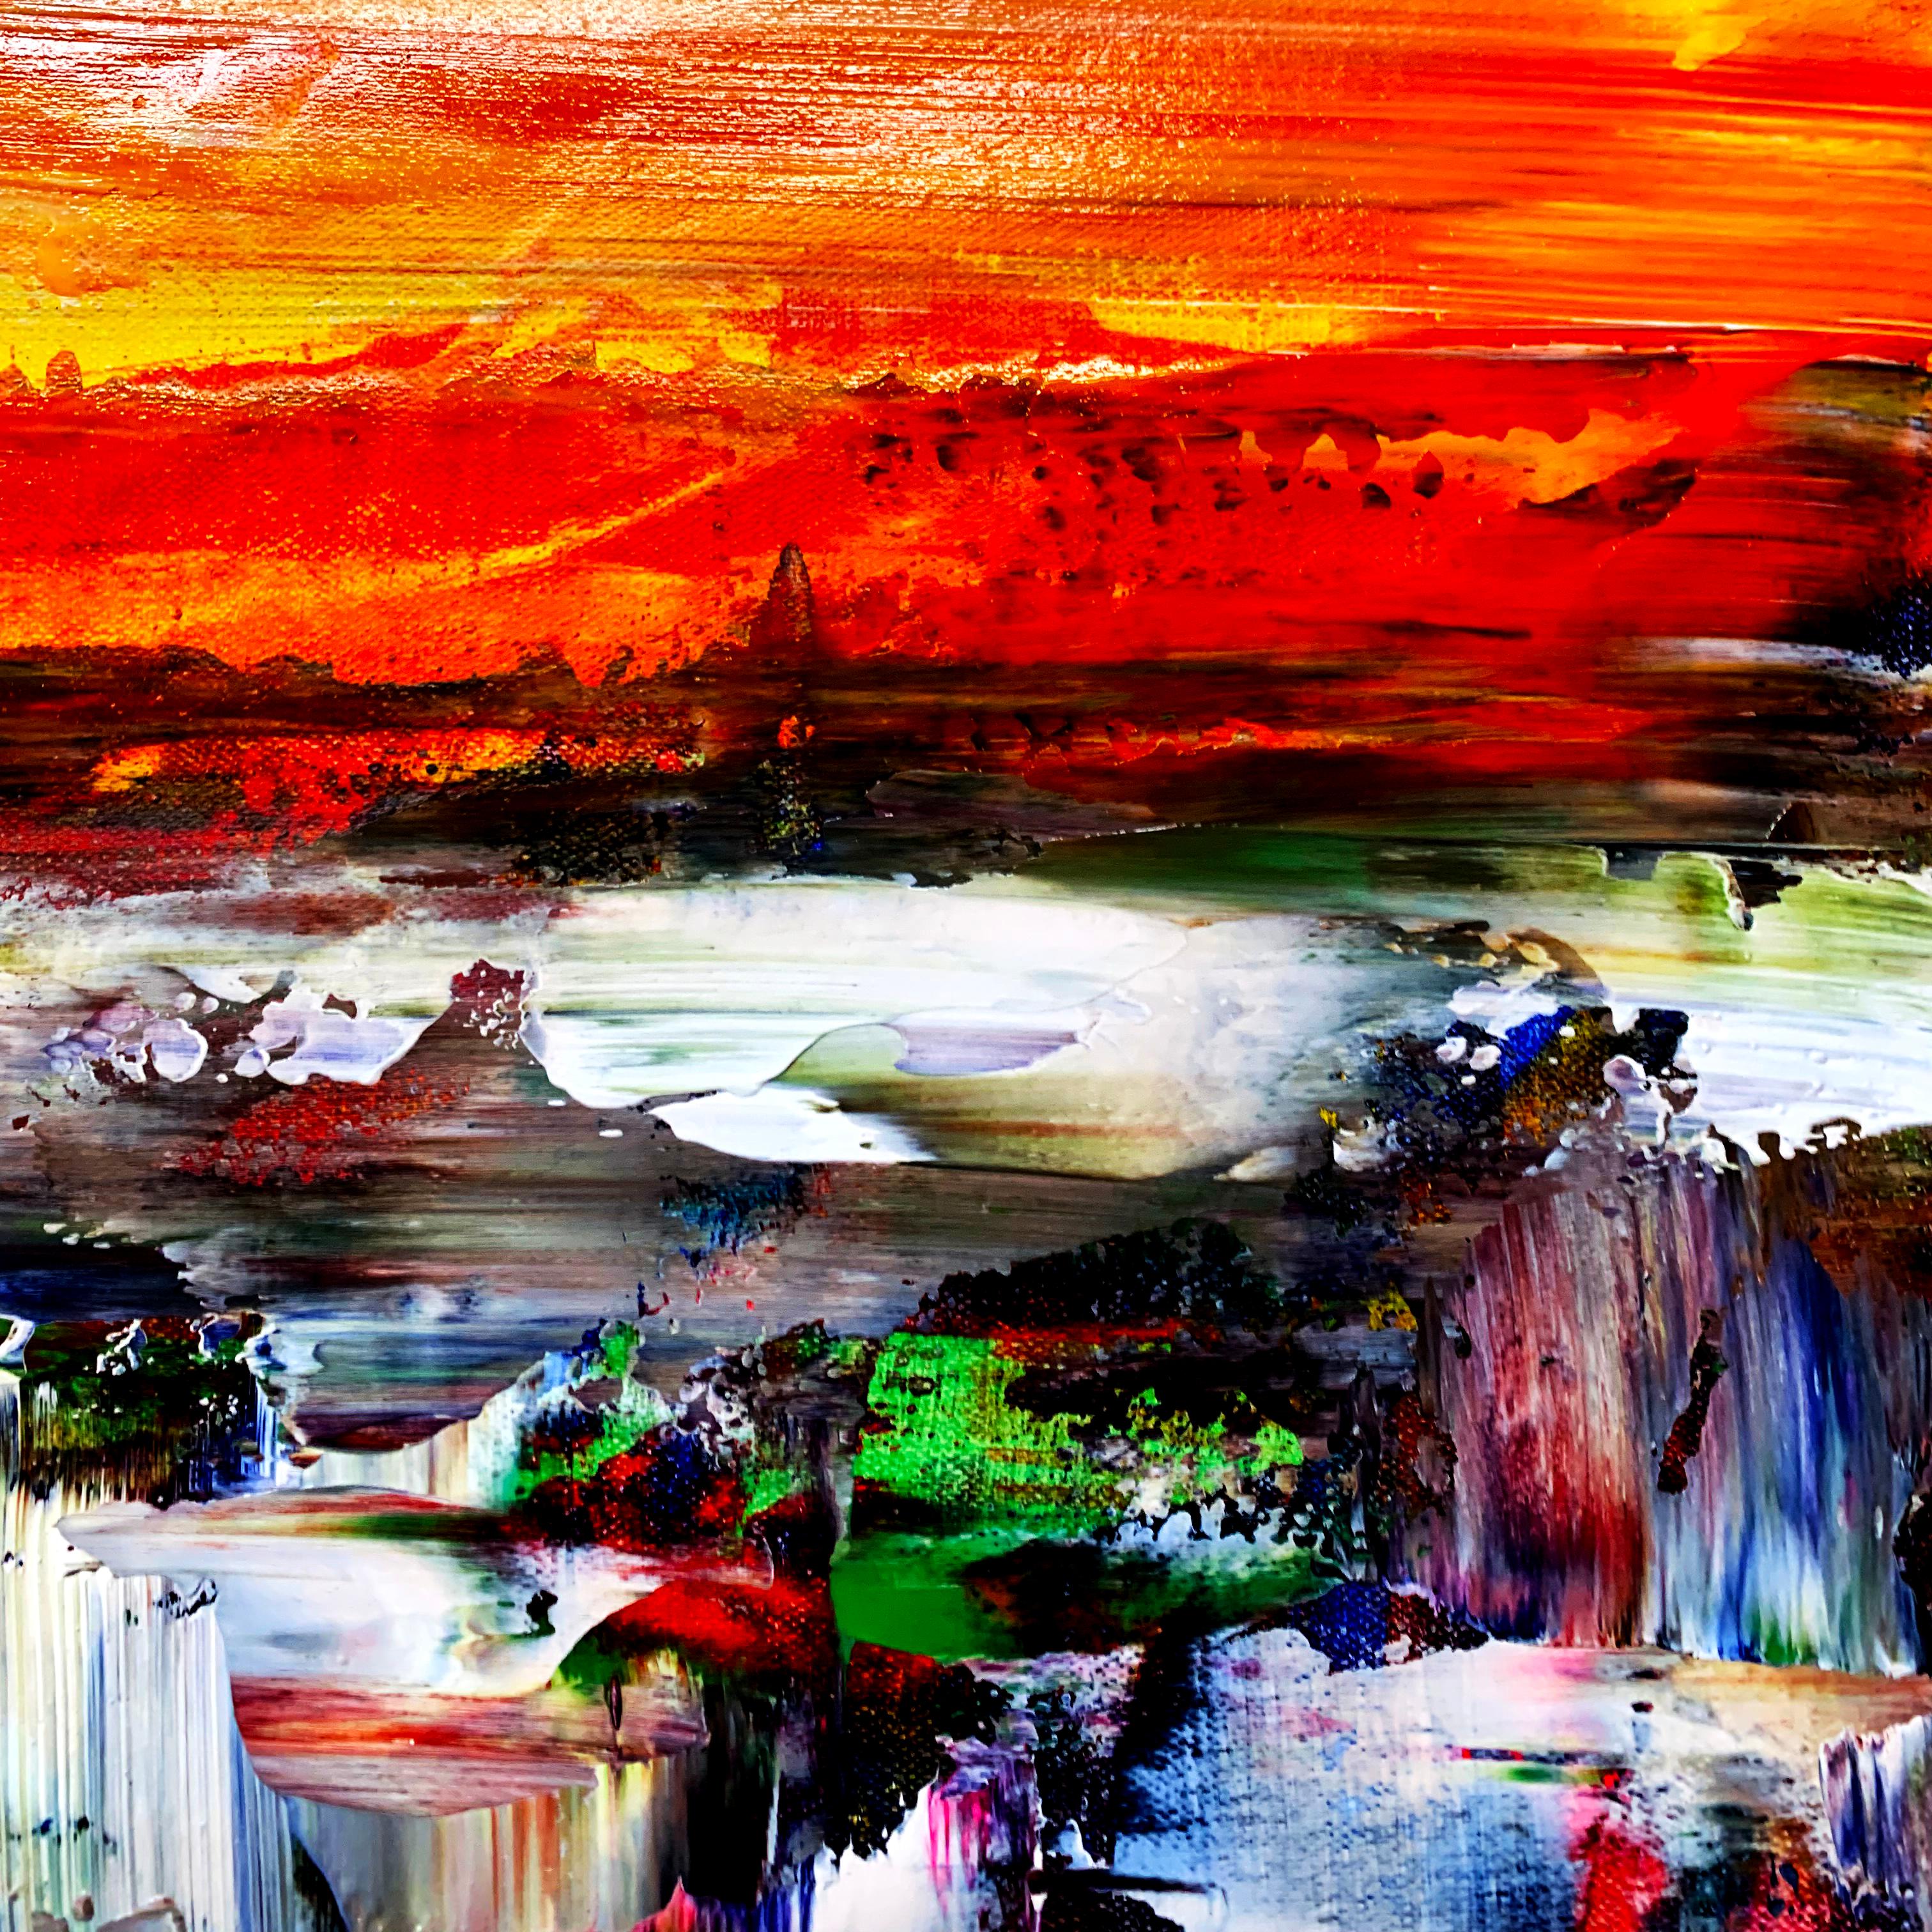 This artwork is an emotional representation of Osaka during a sunset. The work is in the style of abstract expressionism.

This artwork is painted on professional-grade canvas stretched and sealed with varnish. The canvas has dimensions 155 cm in